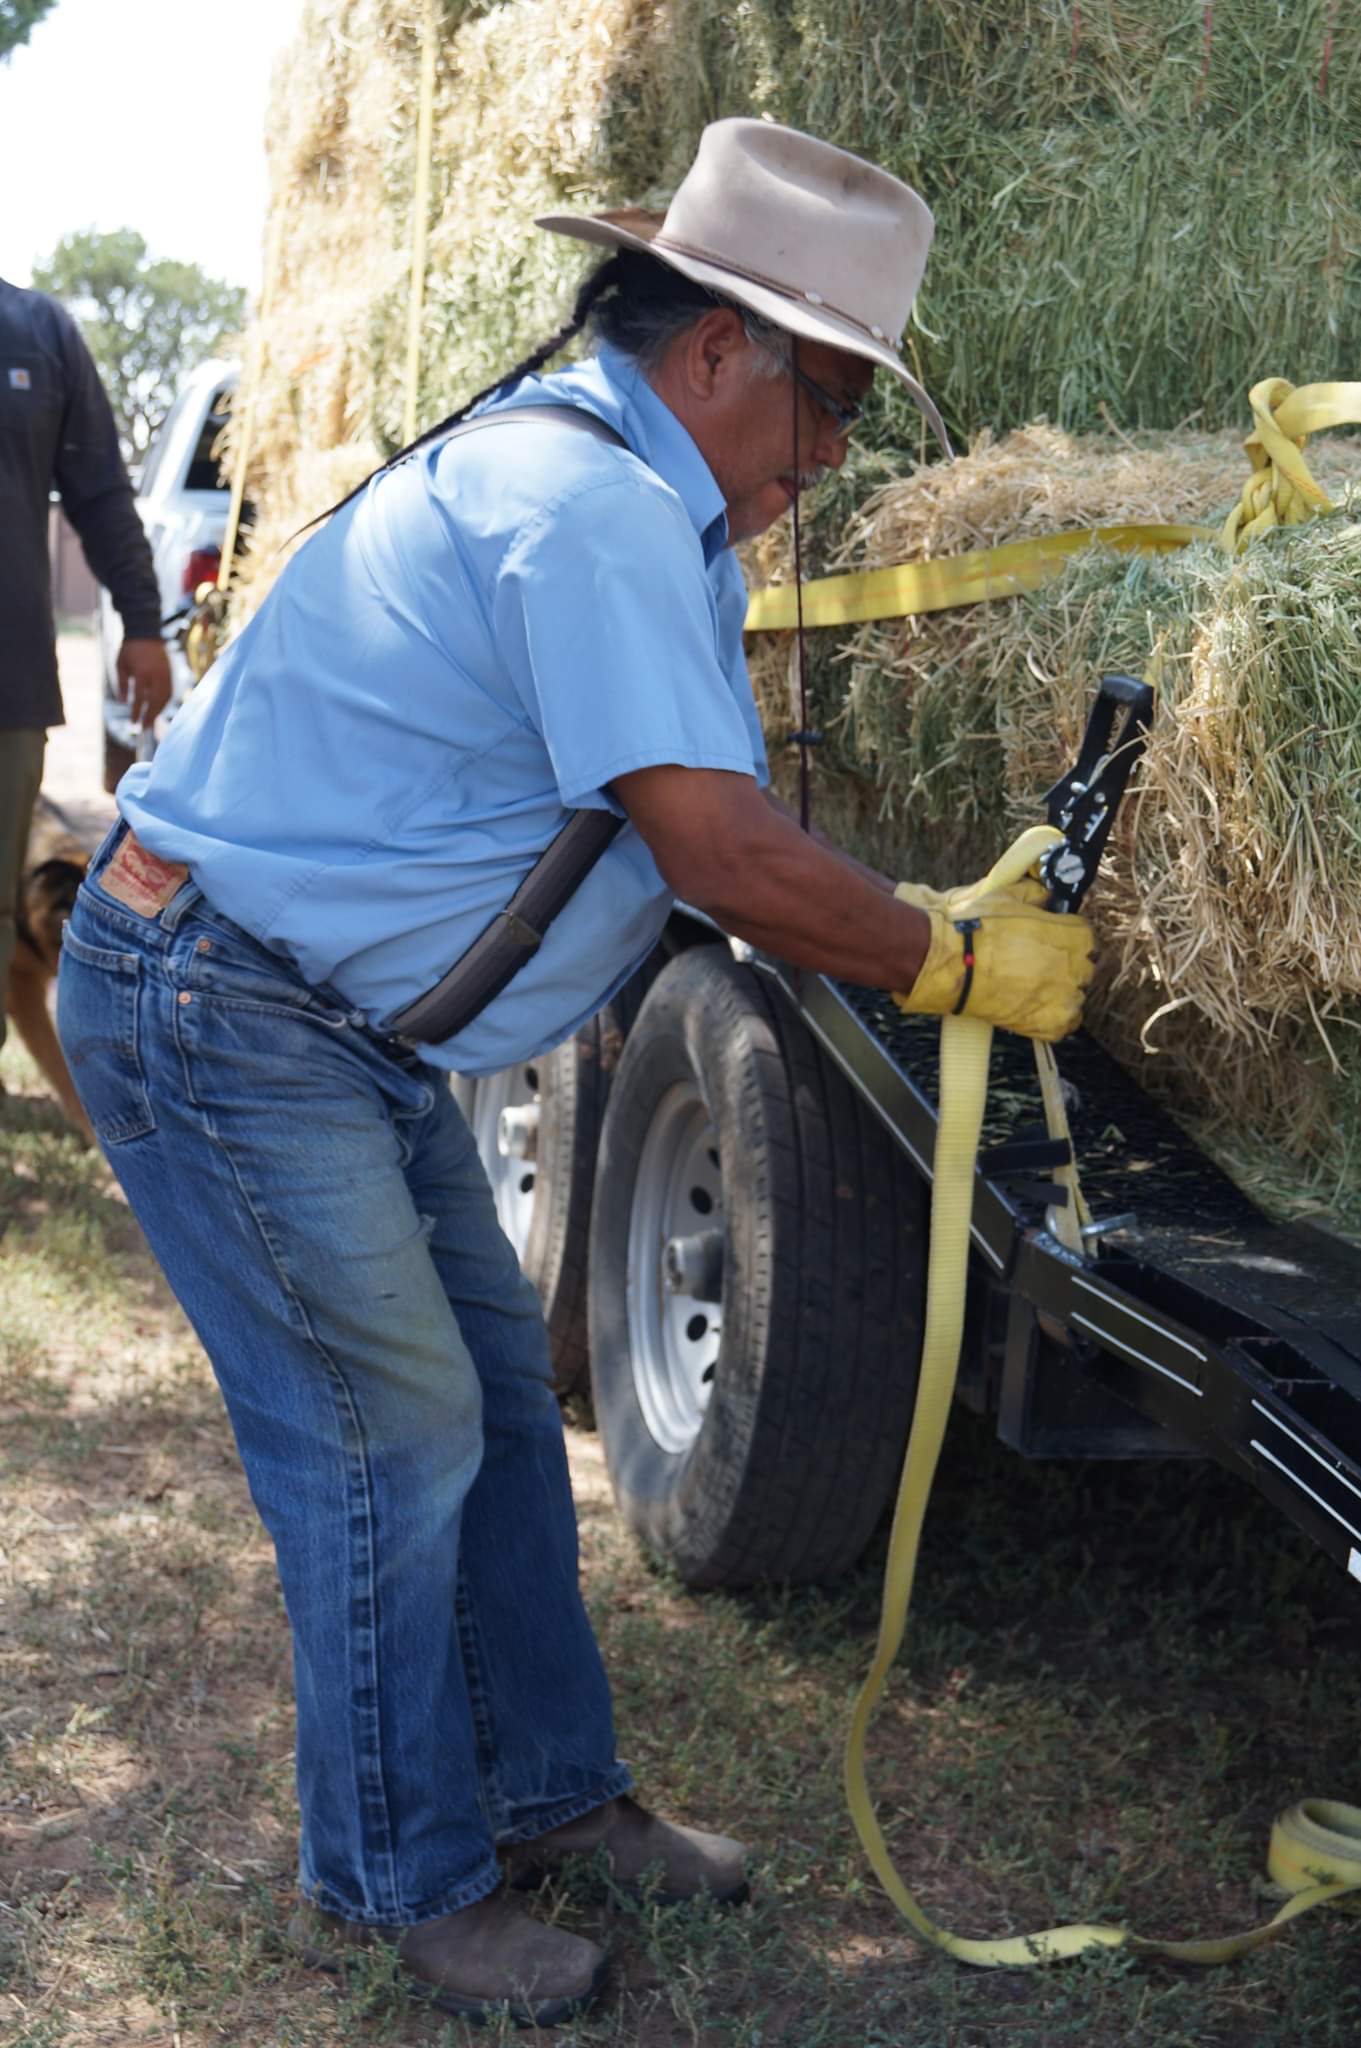 A man wearing blue jeans, suspenders, a light blue button down short sleeve shirt, and a beige-white hat bends over the bed of a truck, buckling in bales of hay.